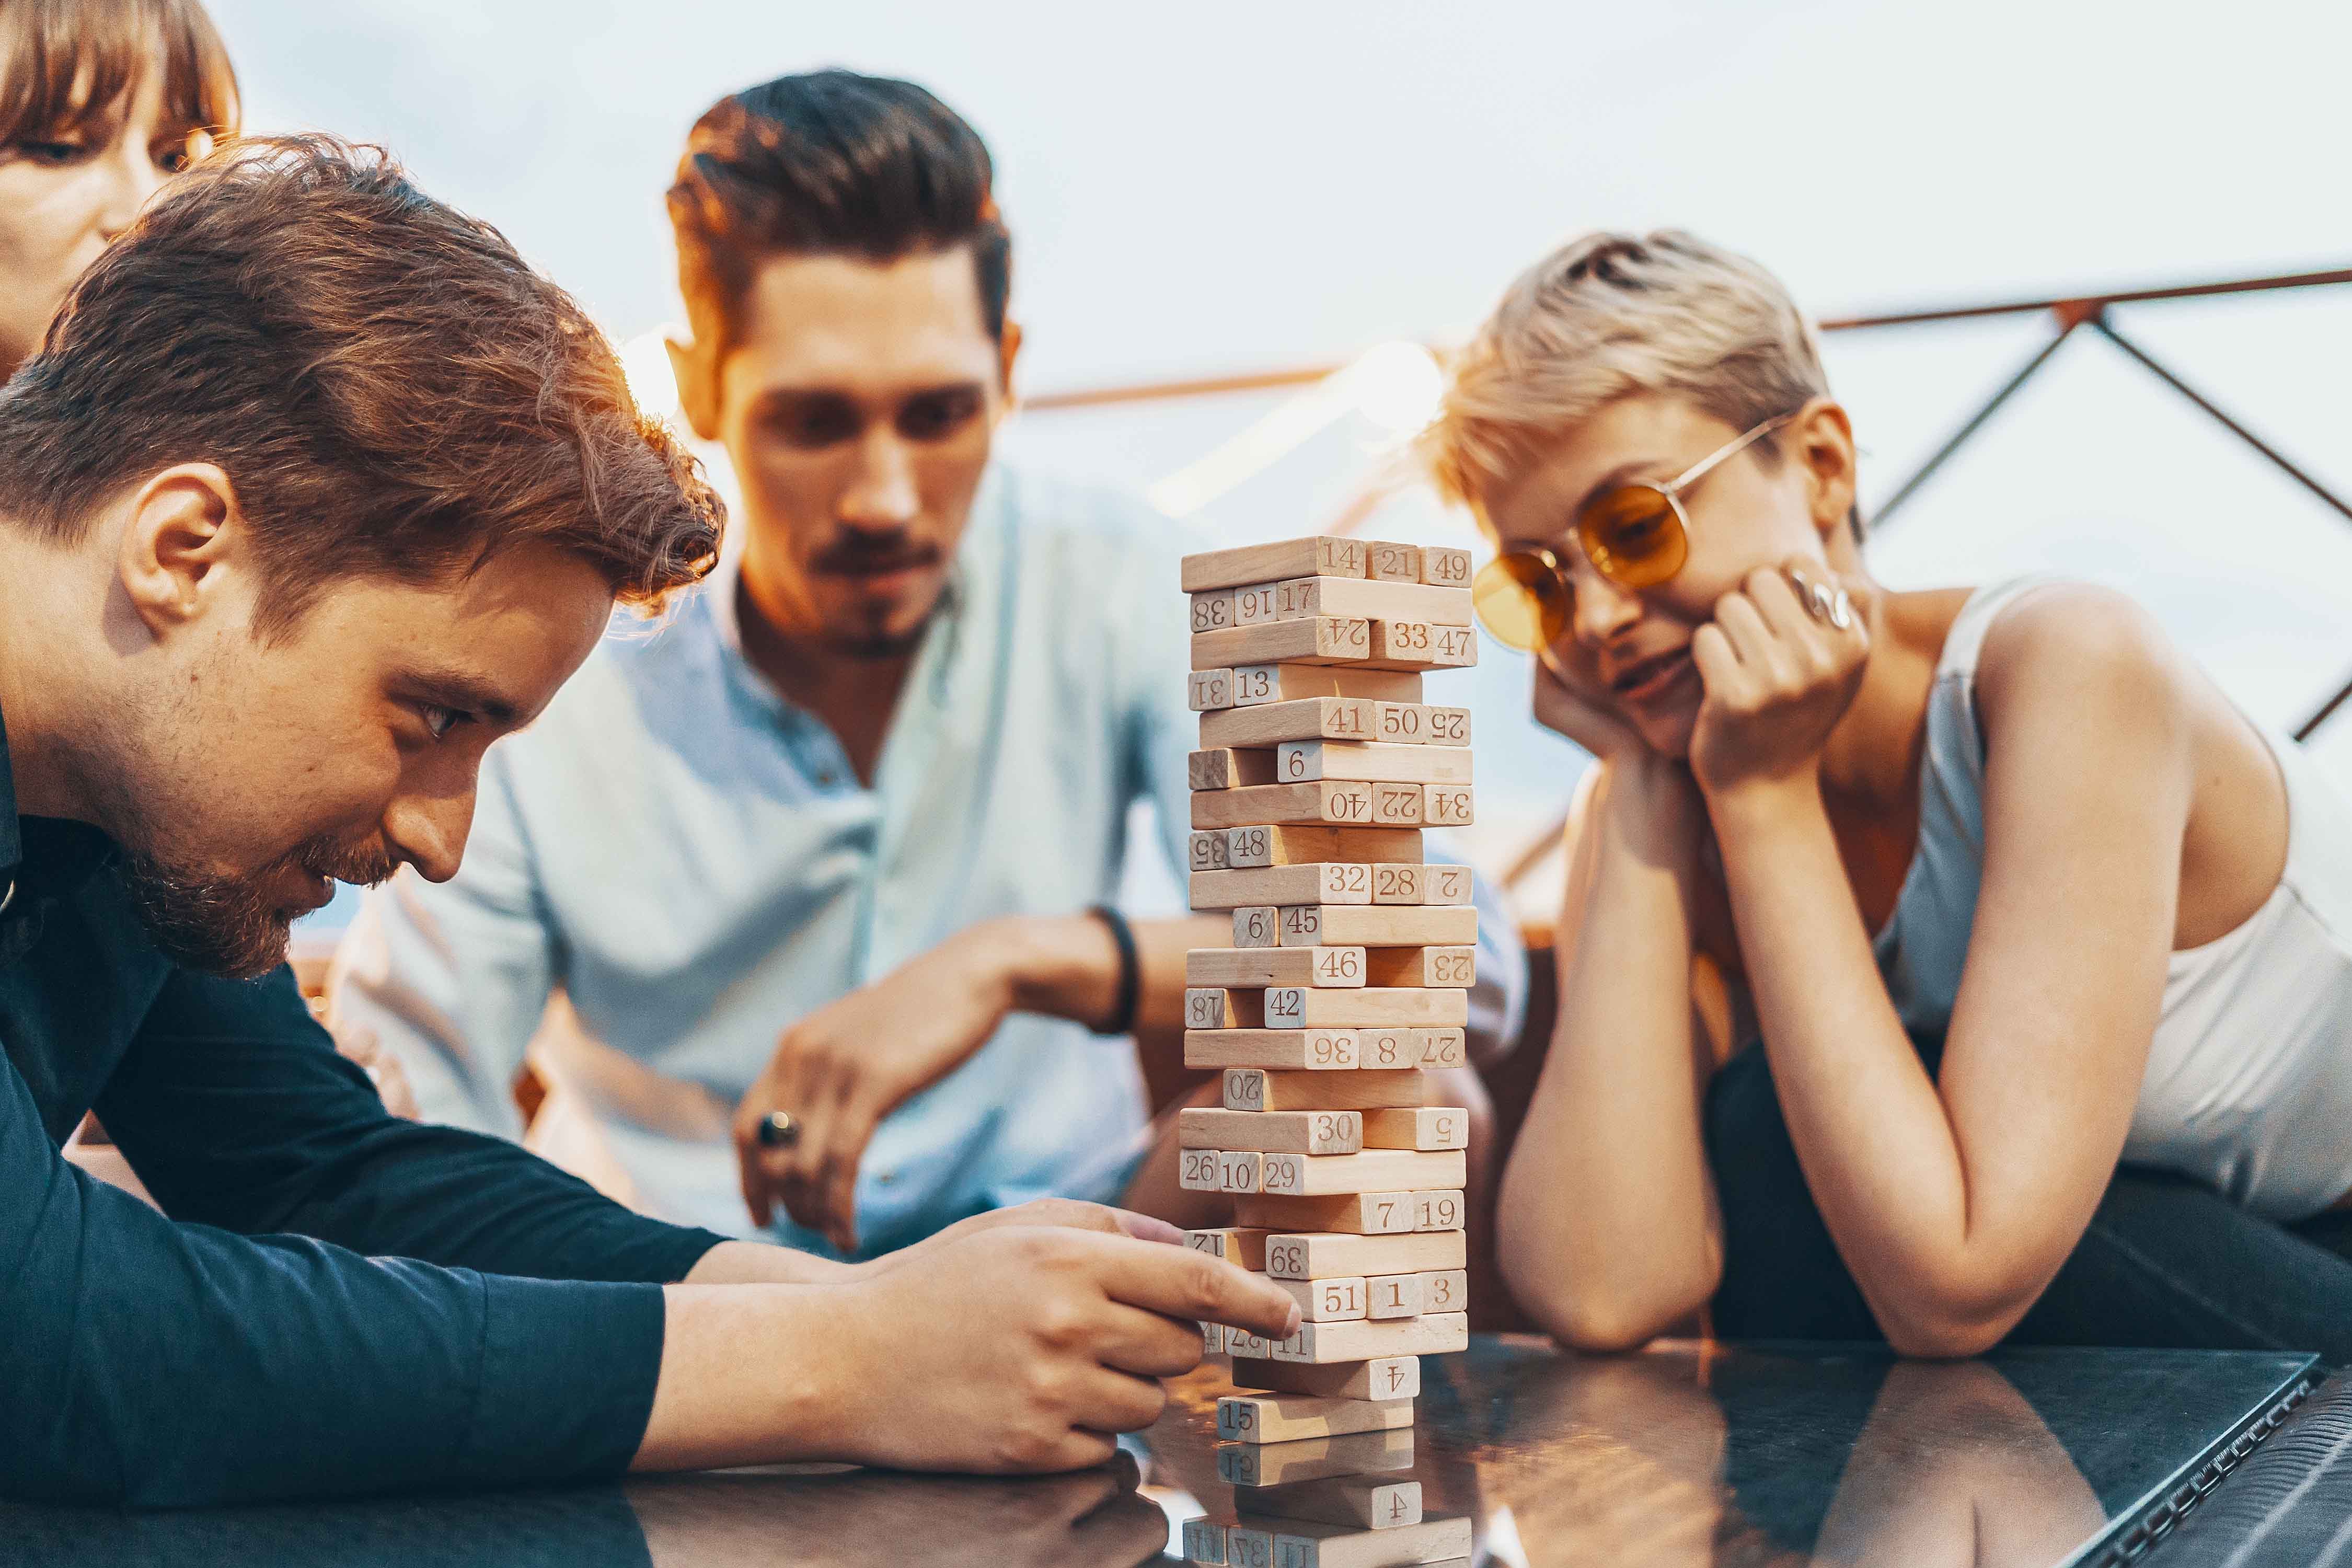 The games that businesses play: Use cases of serious games for problem solving